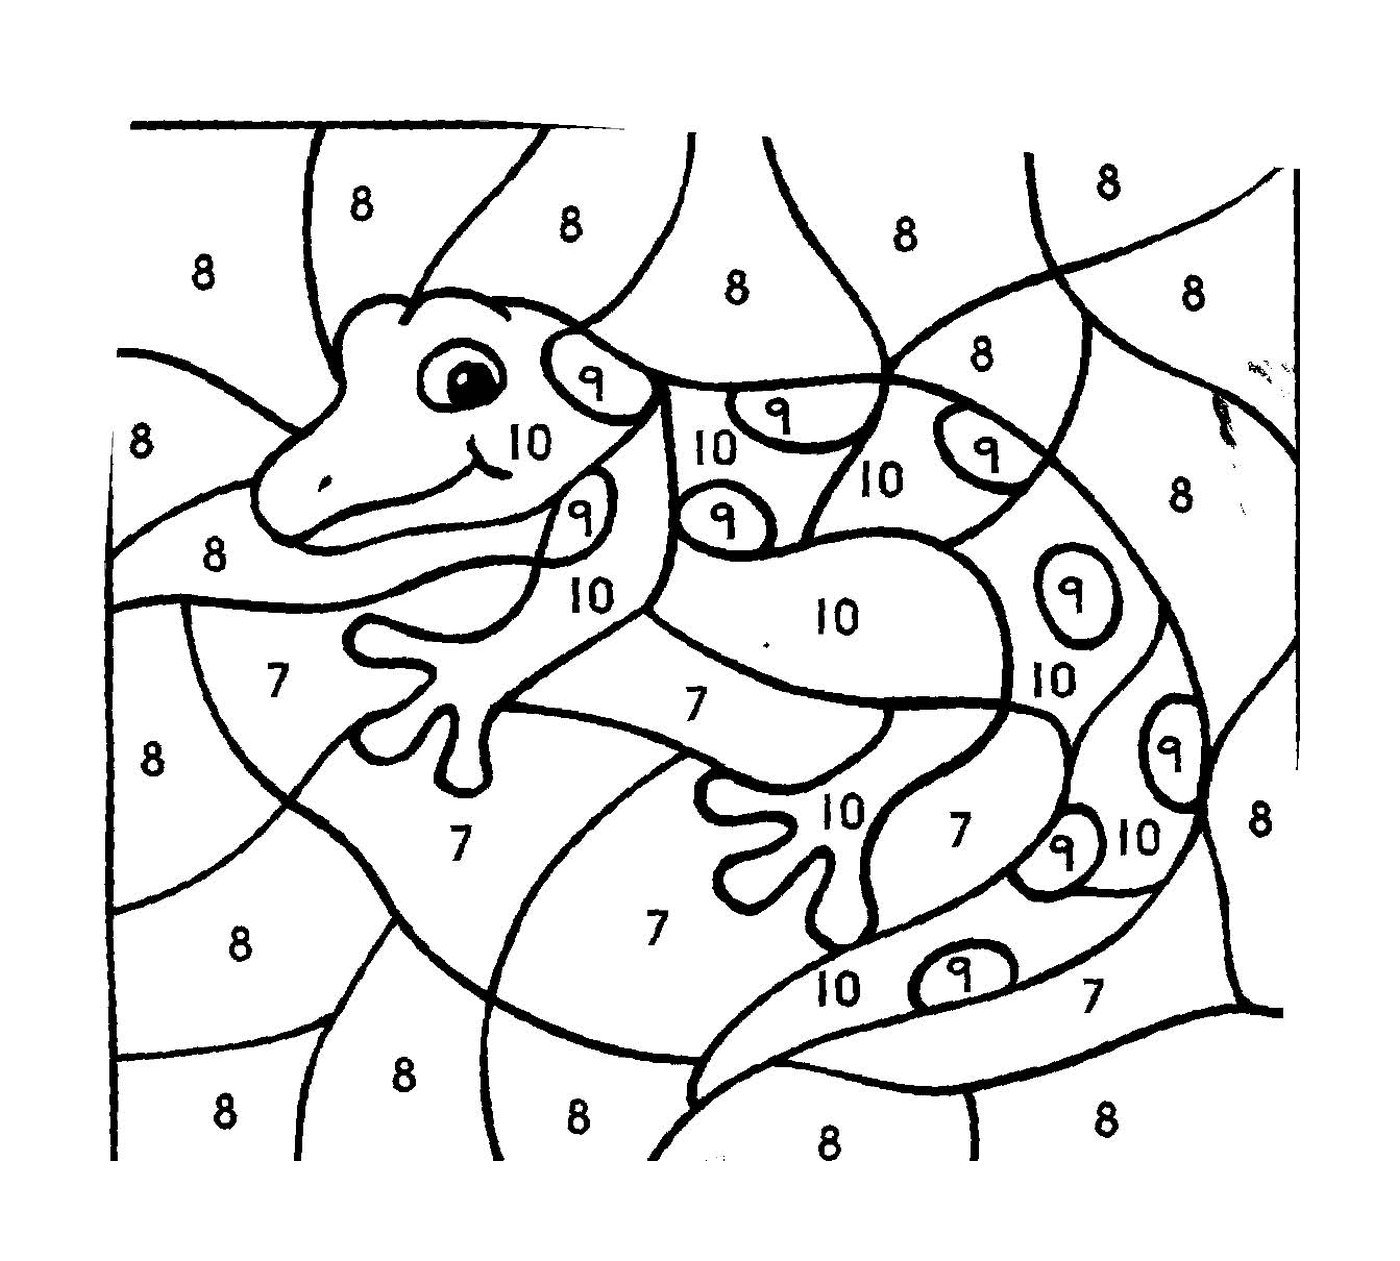  A lizard with numbers 